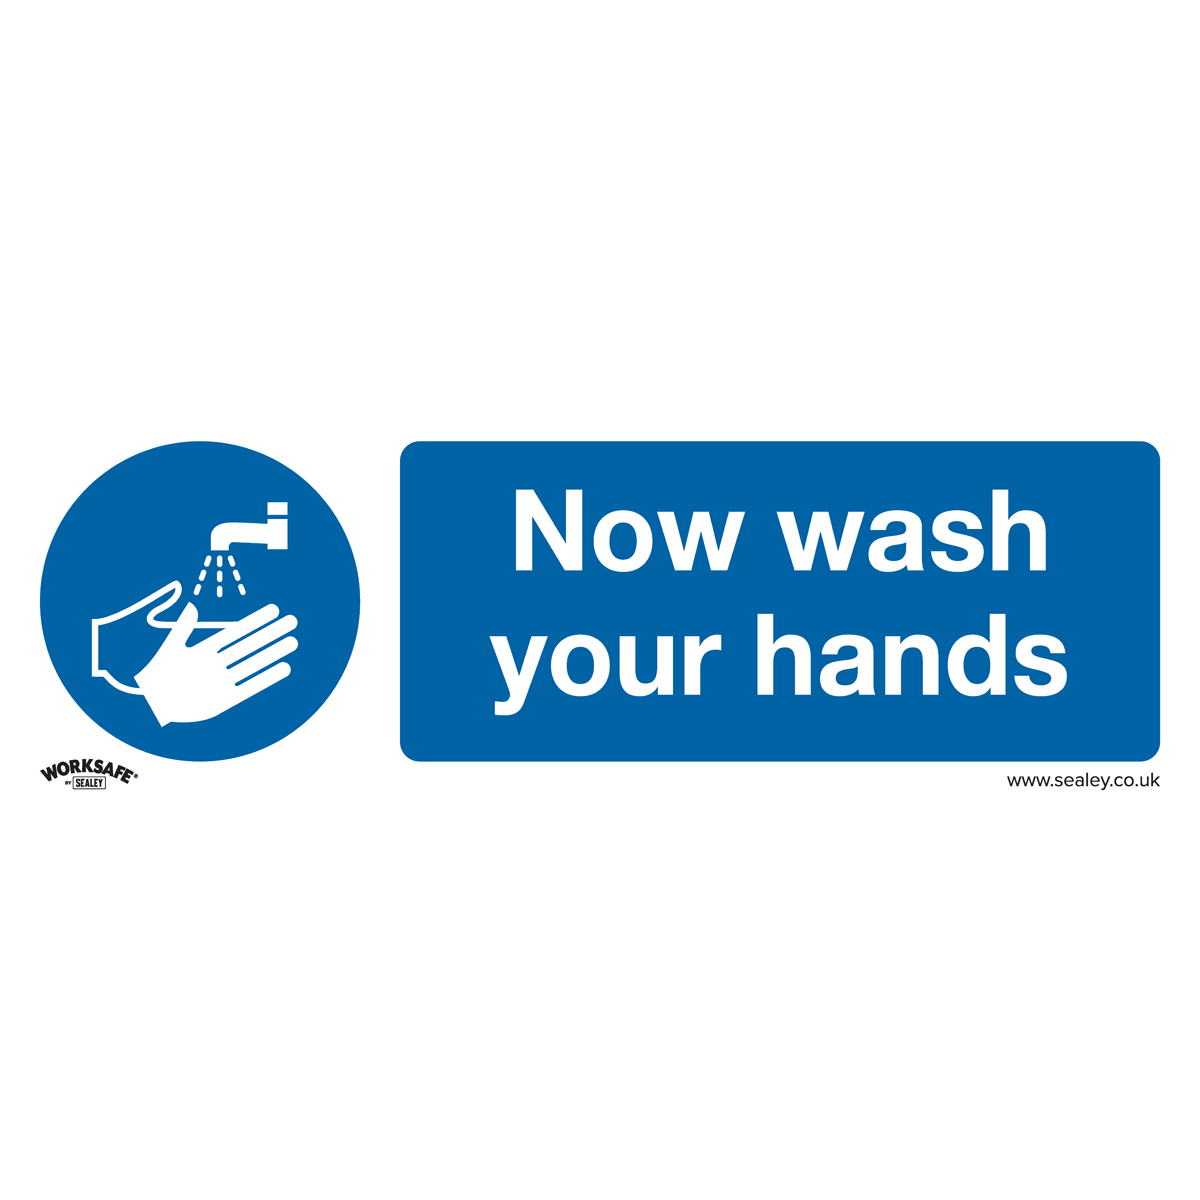 Mandatory Safety Sign - Now Wash Your Hands - Rigid Plastic - Pack of 10 - SS5P10 - Farming Parts